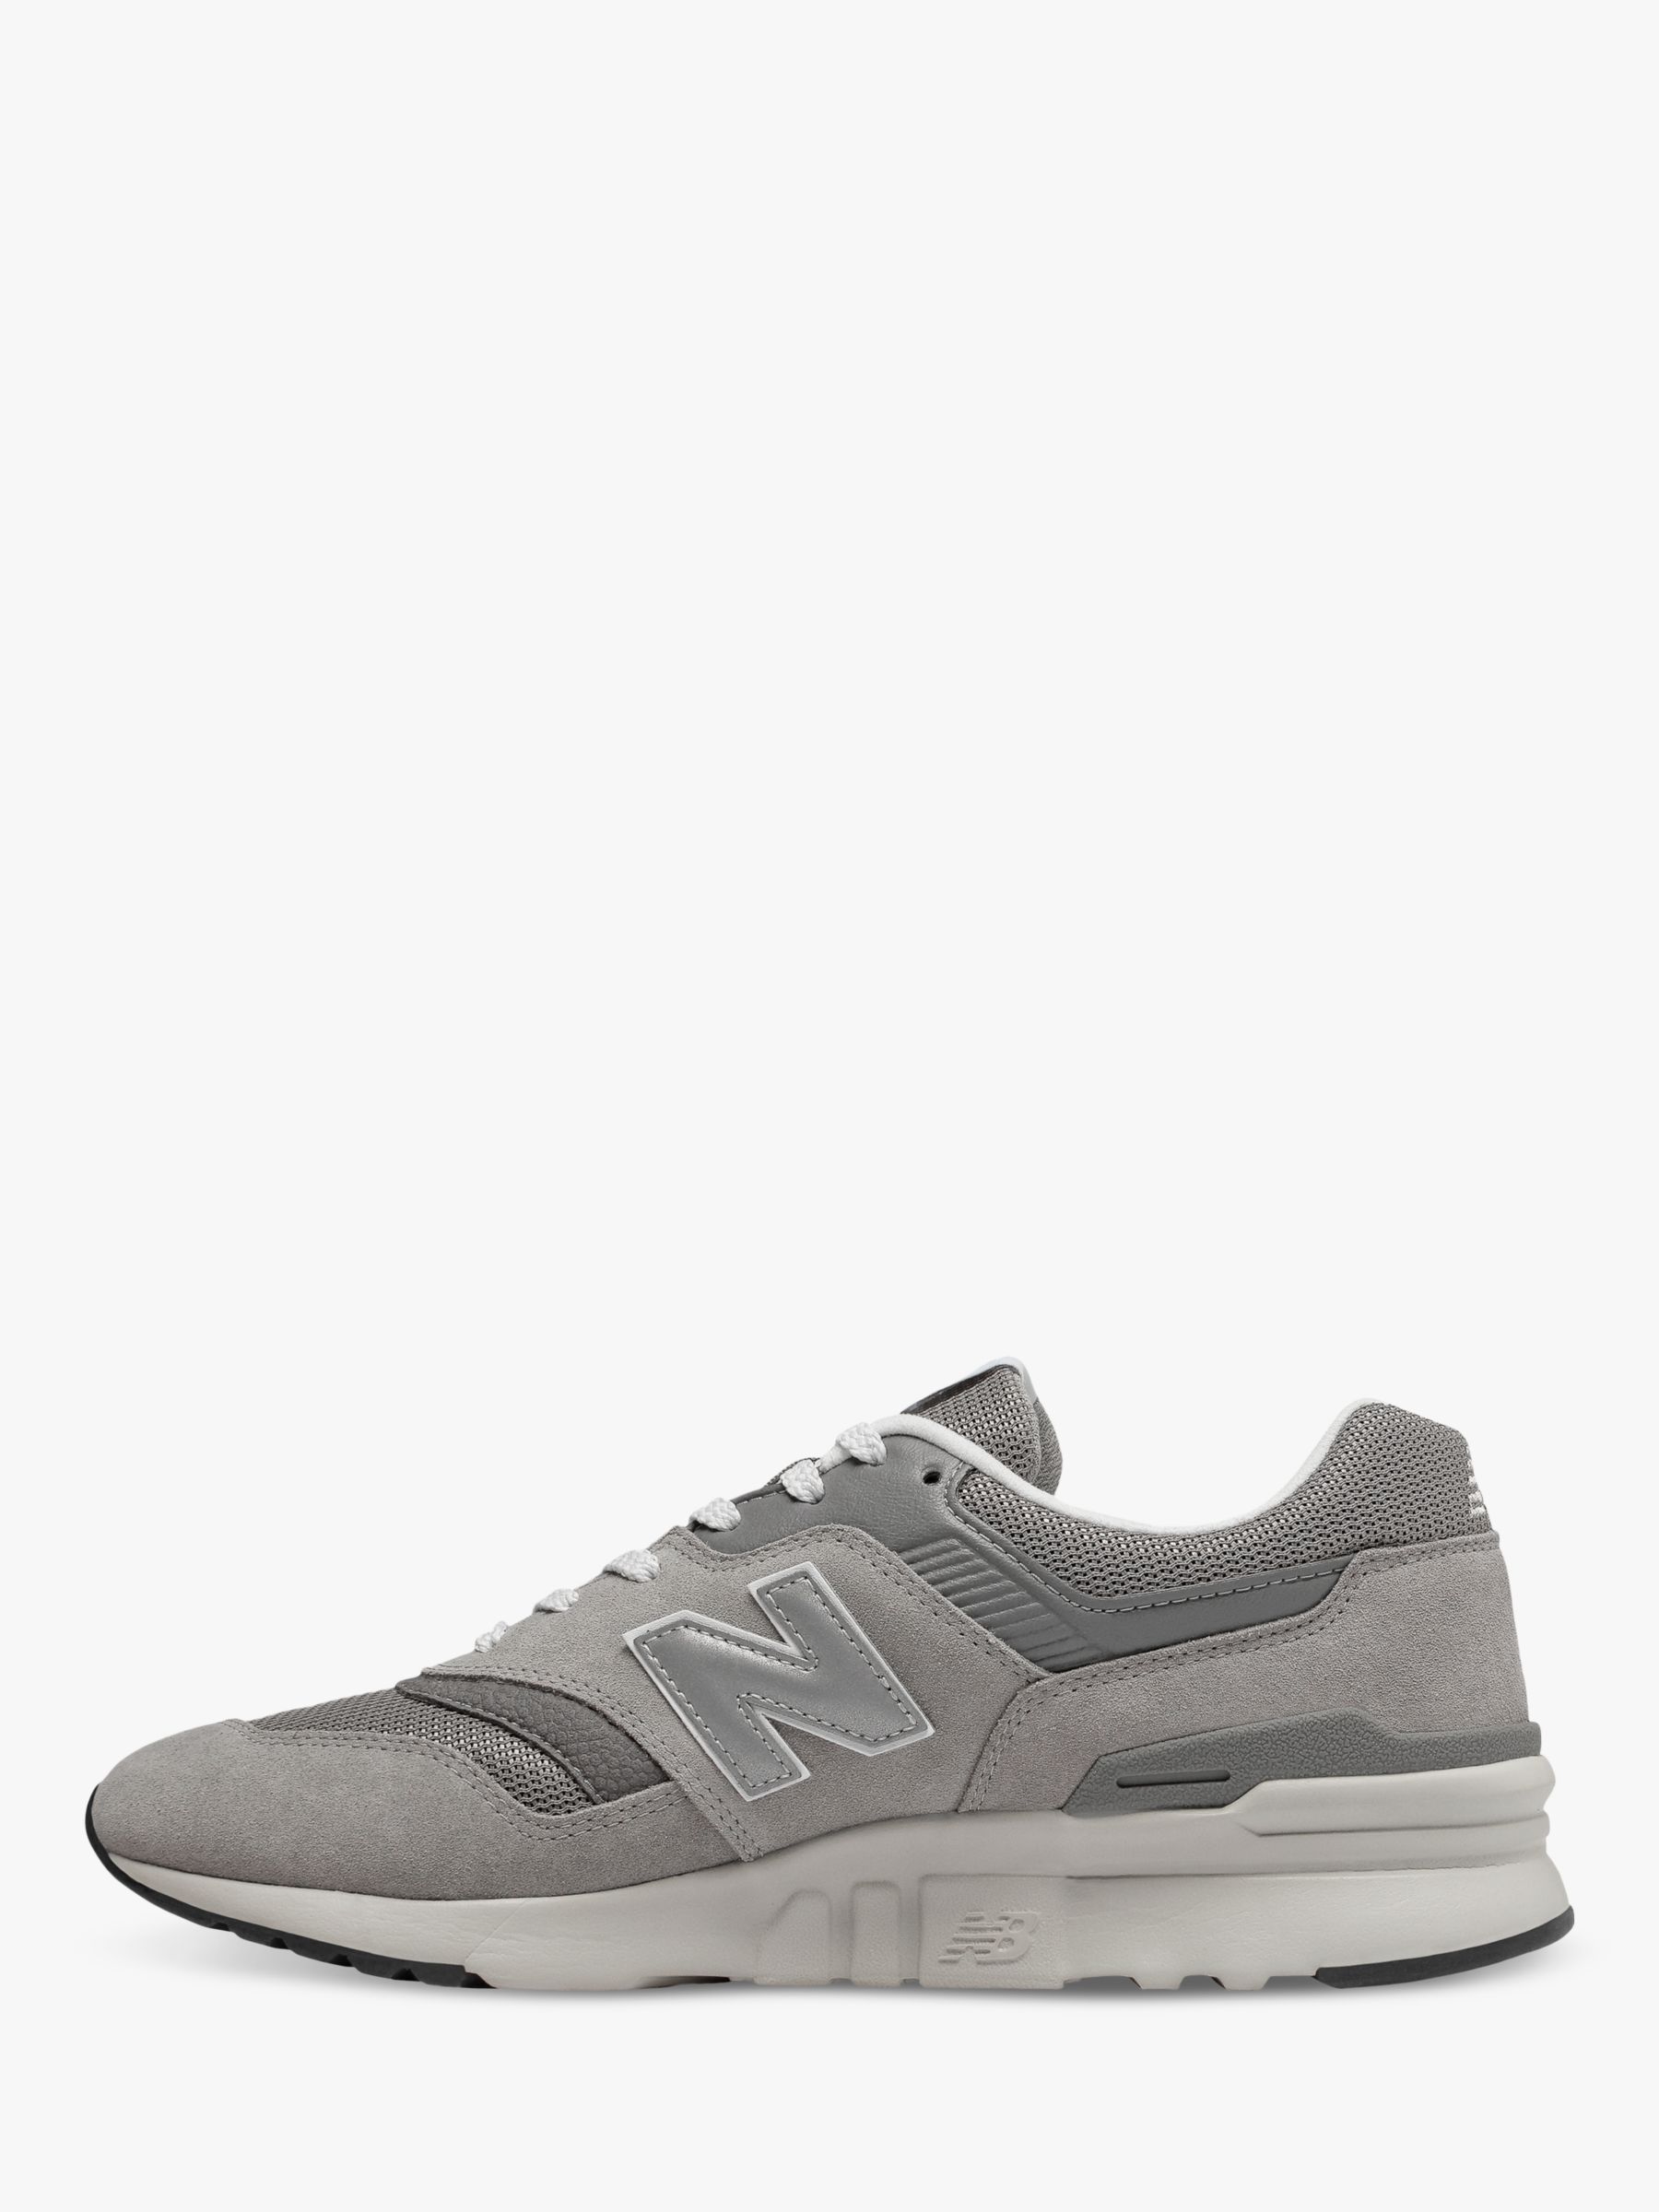 New Balance 997H Men's Suede Trainers, Grey, 7